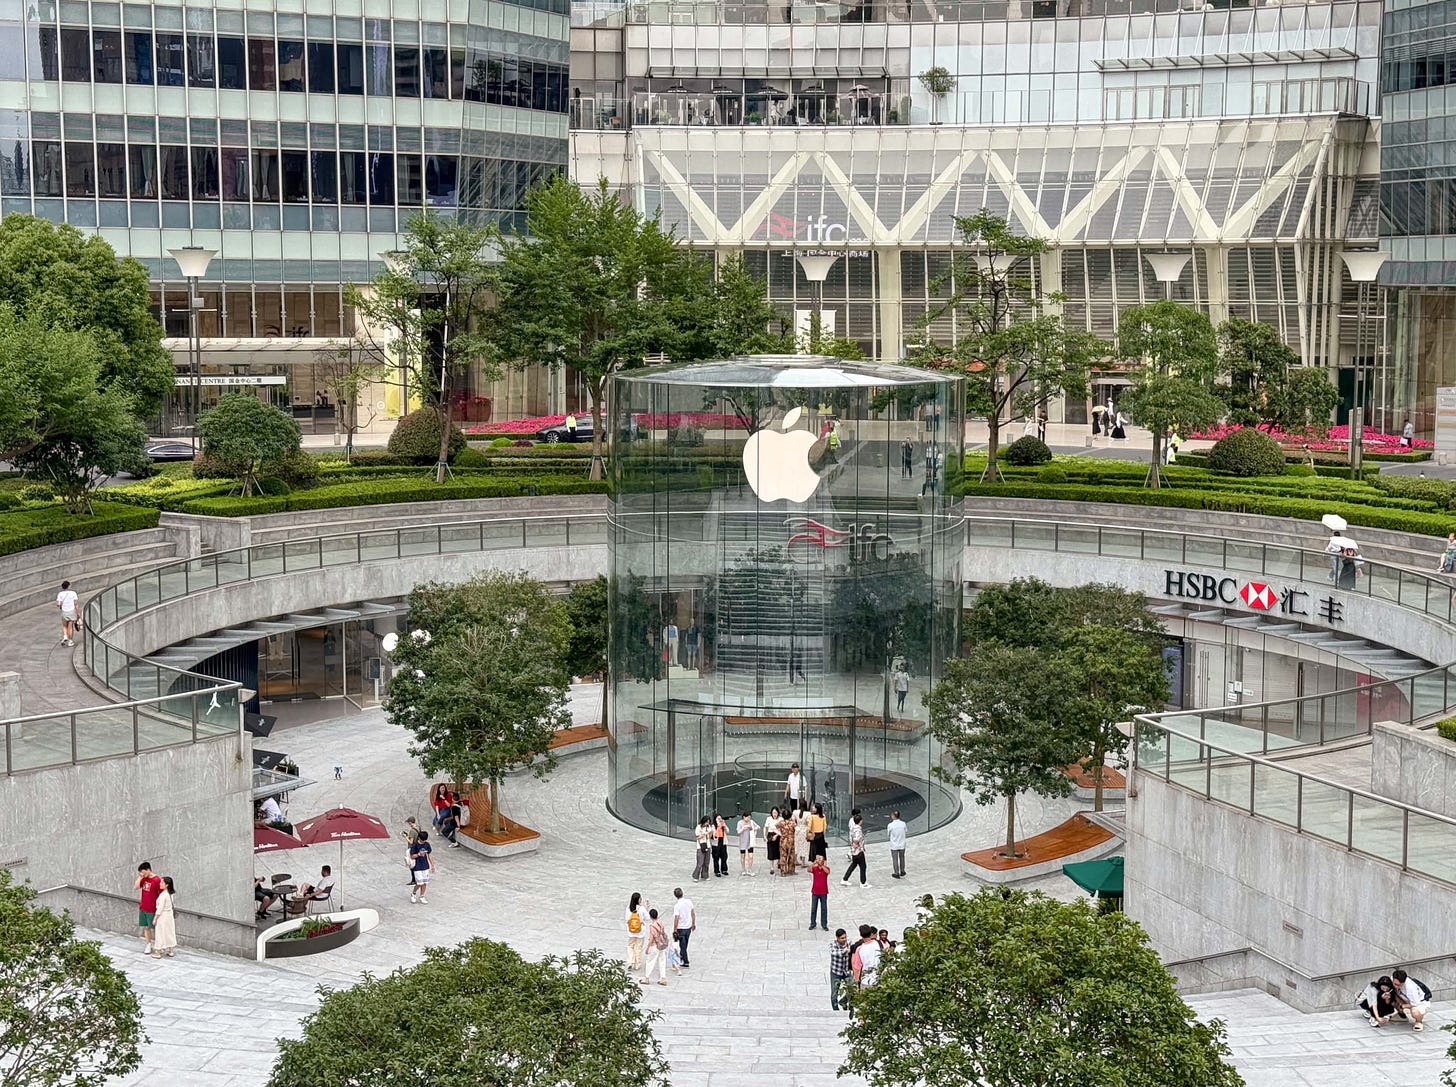 The new glass drum entrance to Apple Pudong and surrounding redesign plaza, pictured from a high vantage point at a distance. Visitors mill about in front of the store.